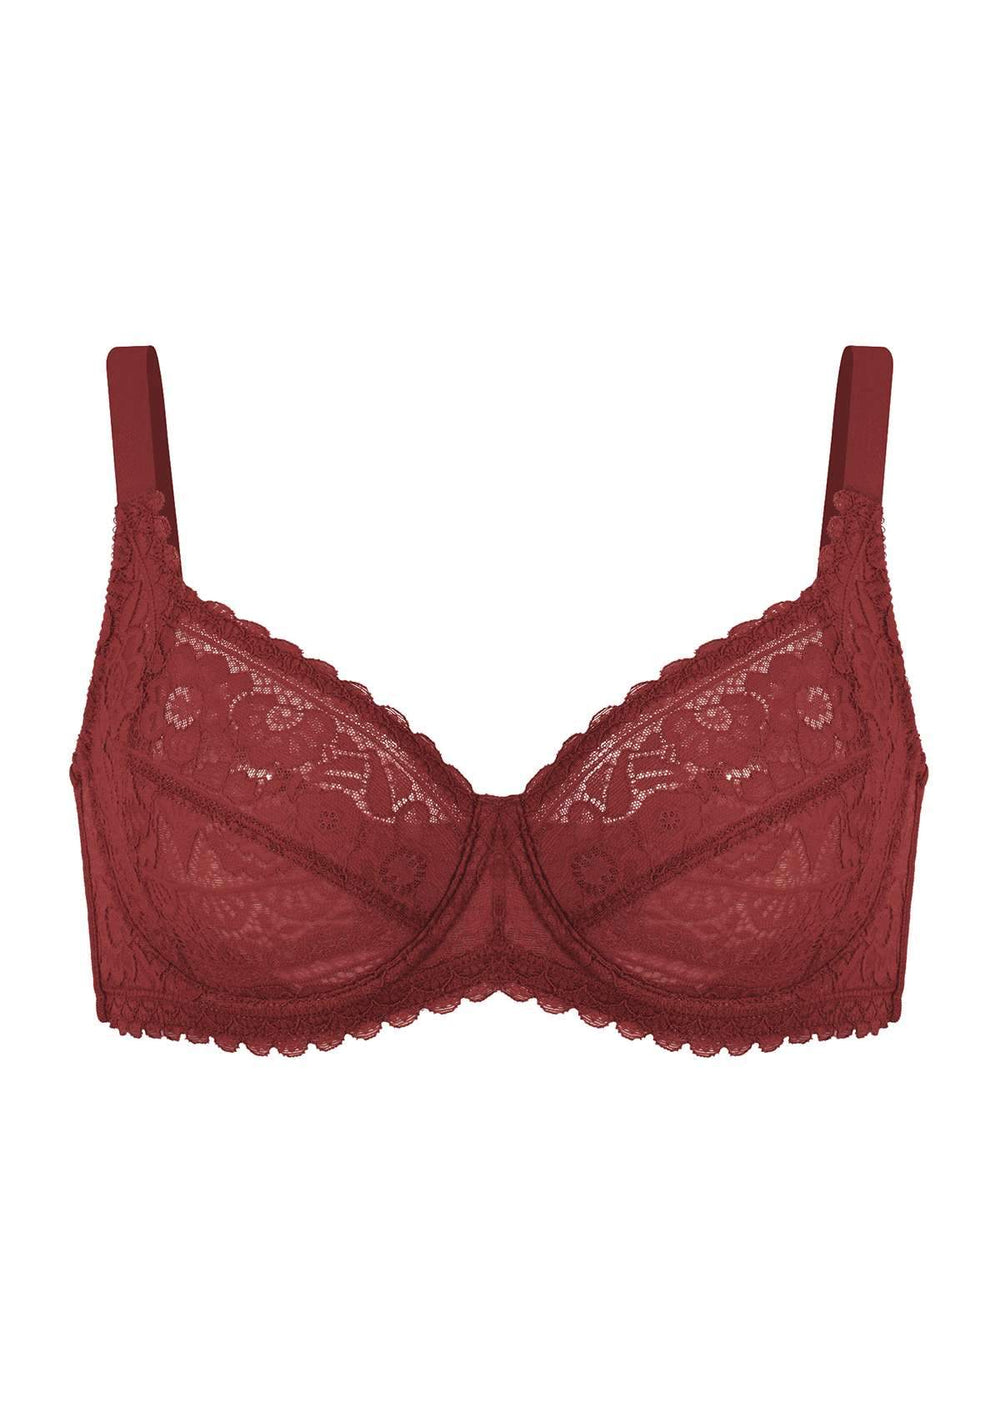 PRIMADONNA - FREE EXPRESS SHIPPING -Madison Full Cup Bra- Open Air